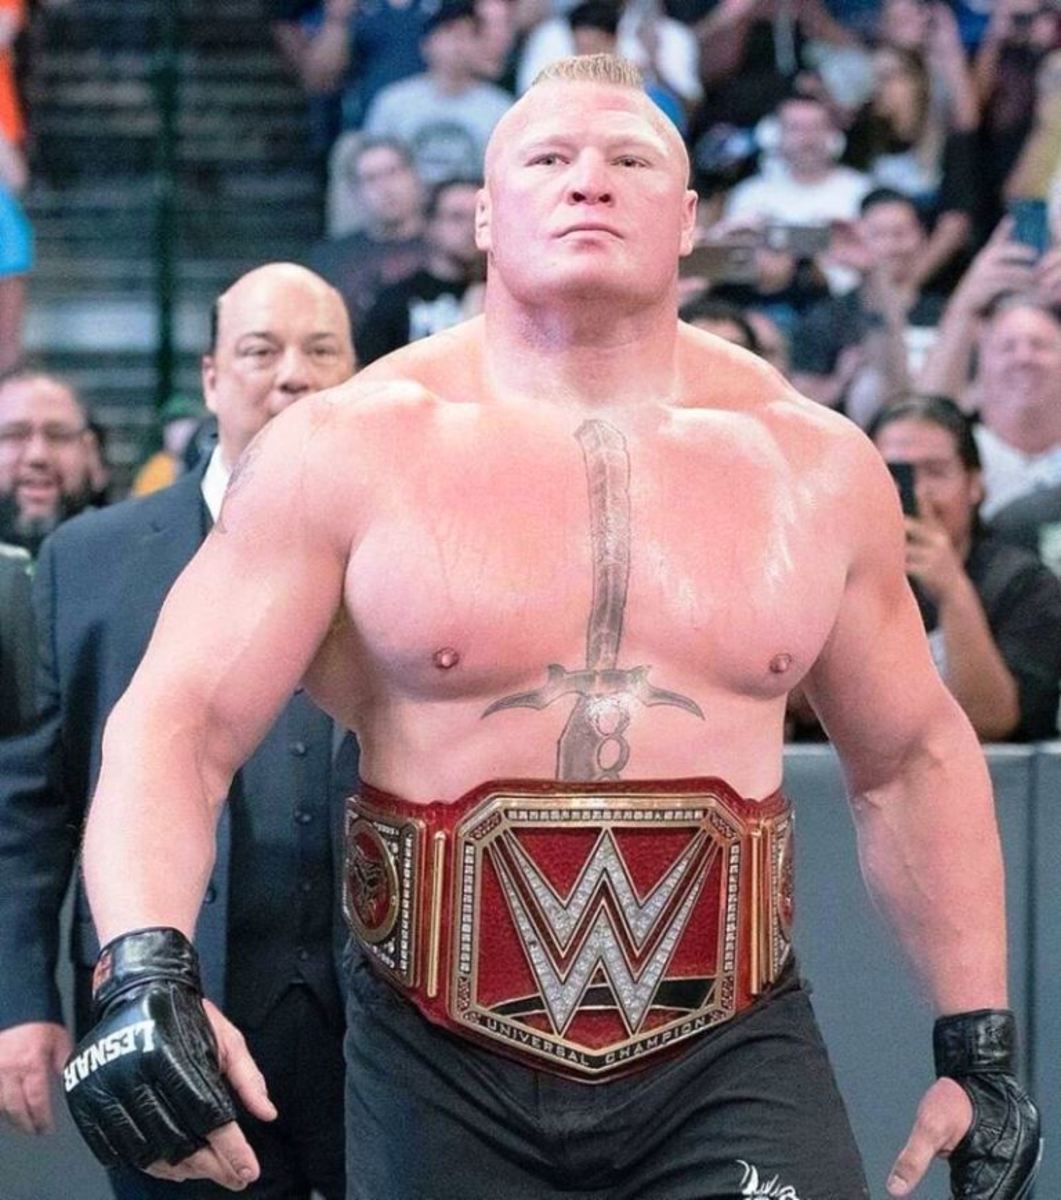 Brock Lesnar became the first man to win the Universal title twice but could not avail his rematch opportunity both times.